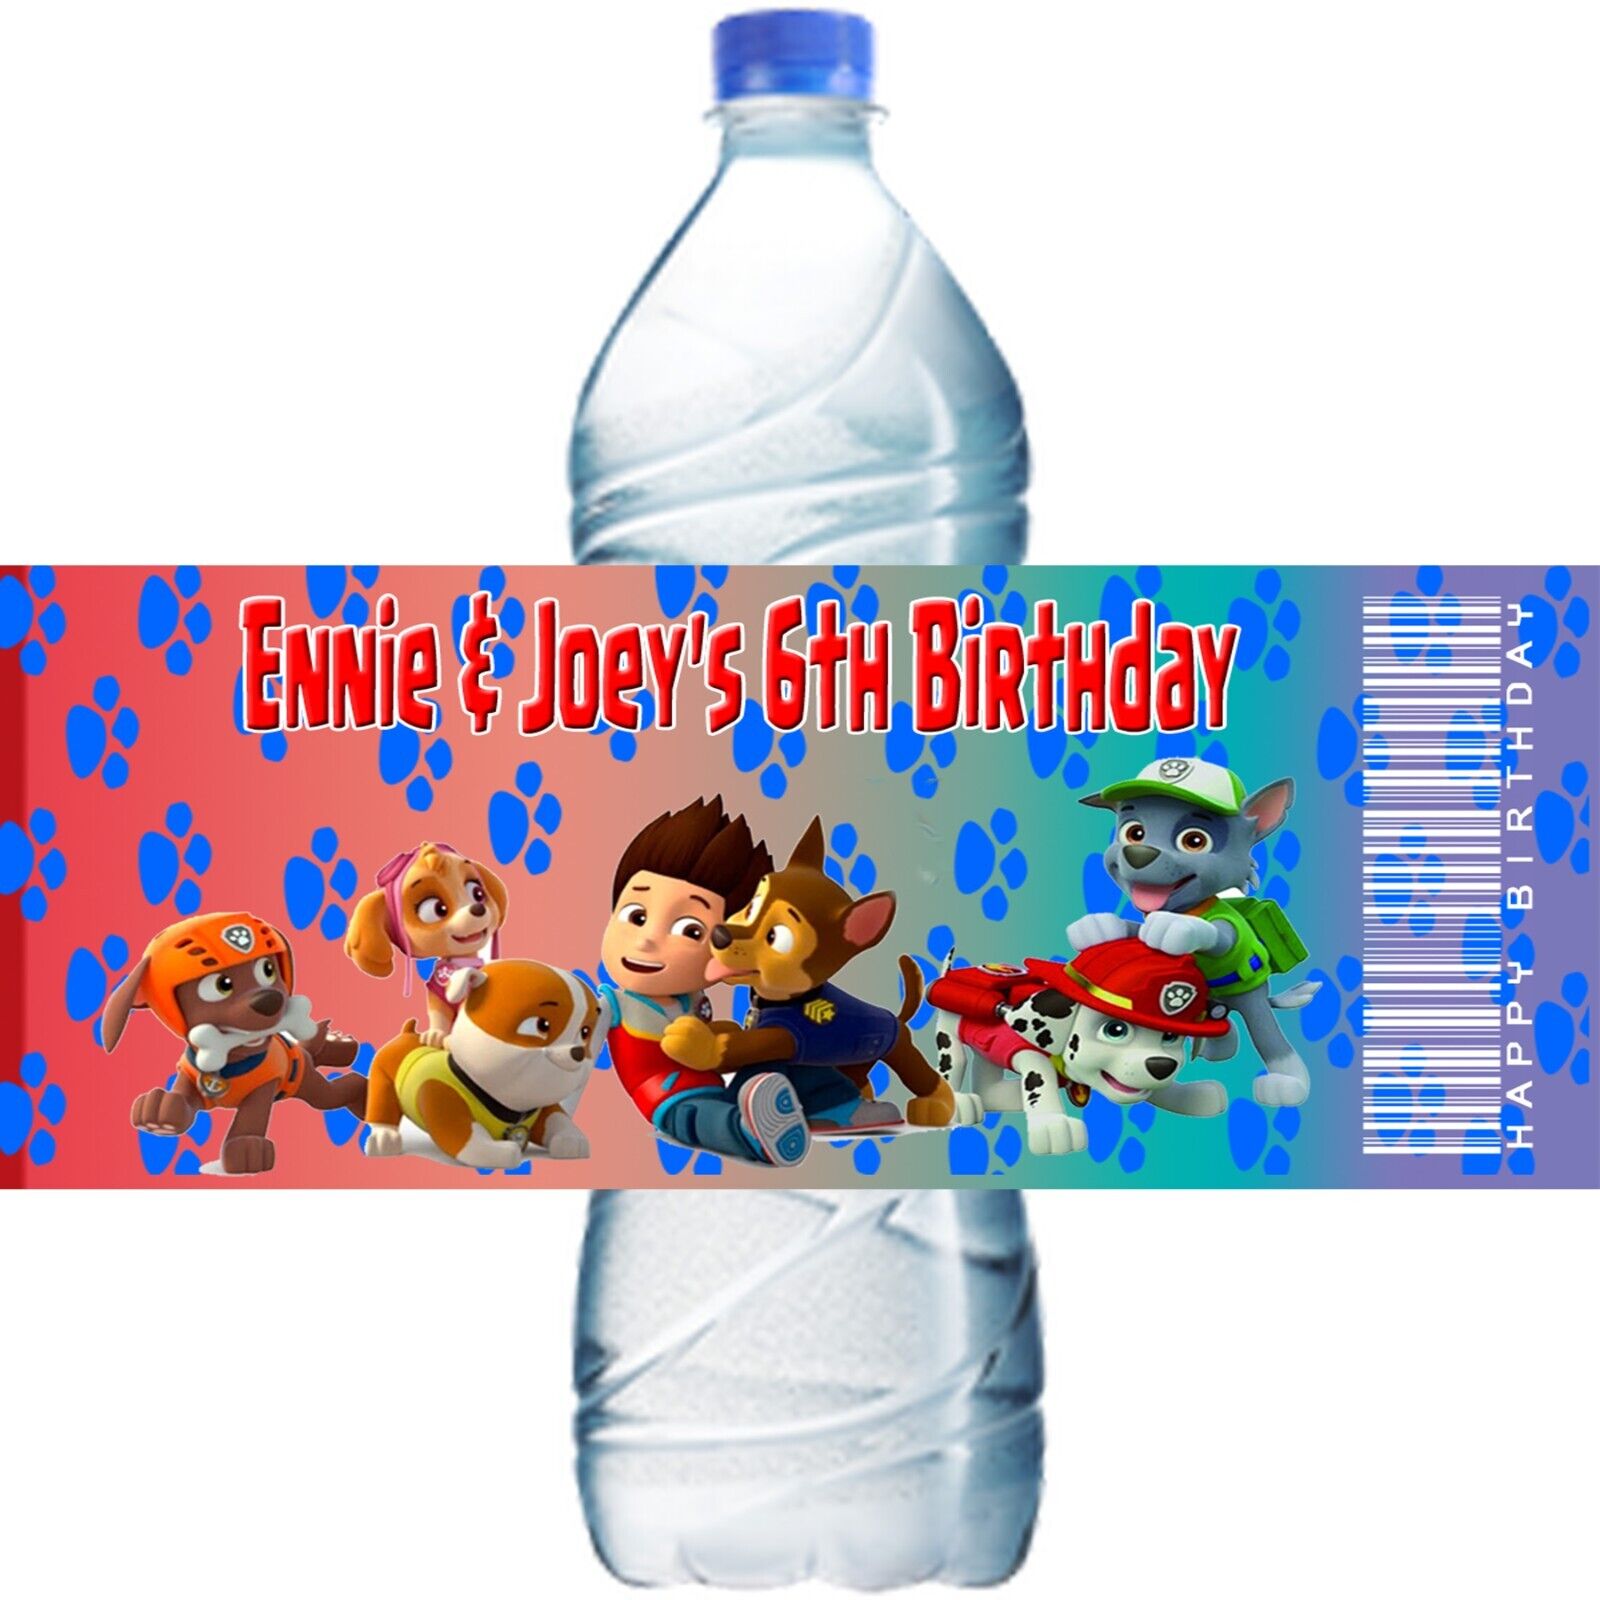 (10) Personalized PAW PATROL Glossy Water Bottle Labels, Party Favors, 2 Sizes